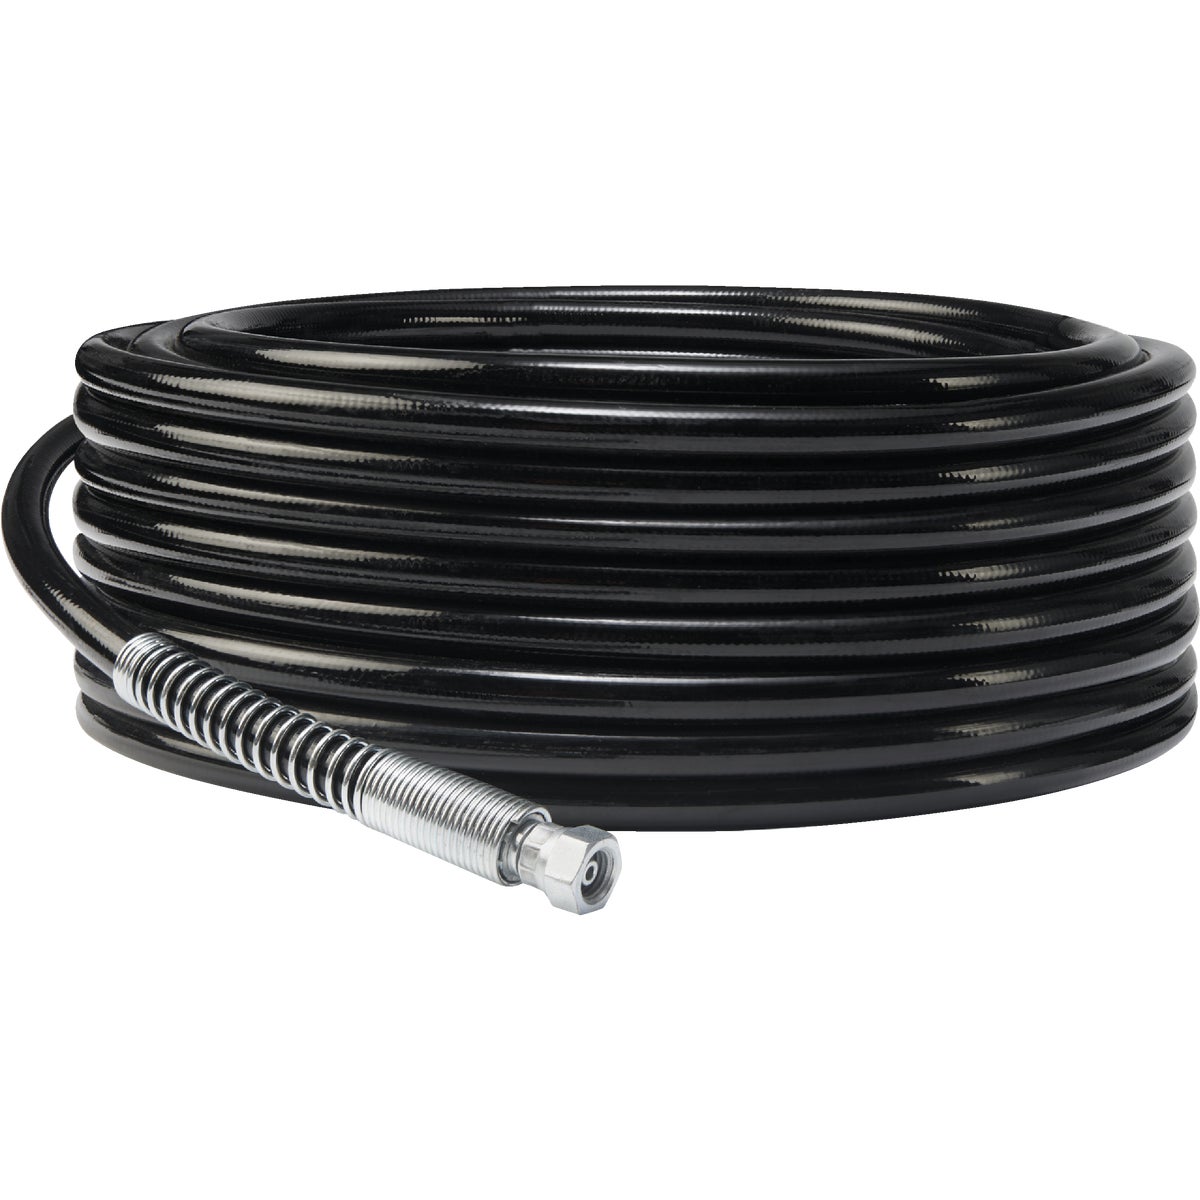 Control Pro 25 Ft. 1/4 In. ID 1500 psi Control Pro Hose